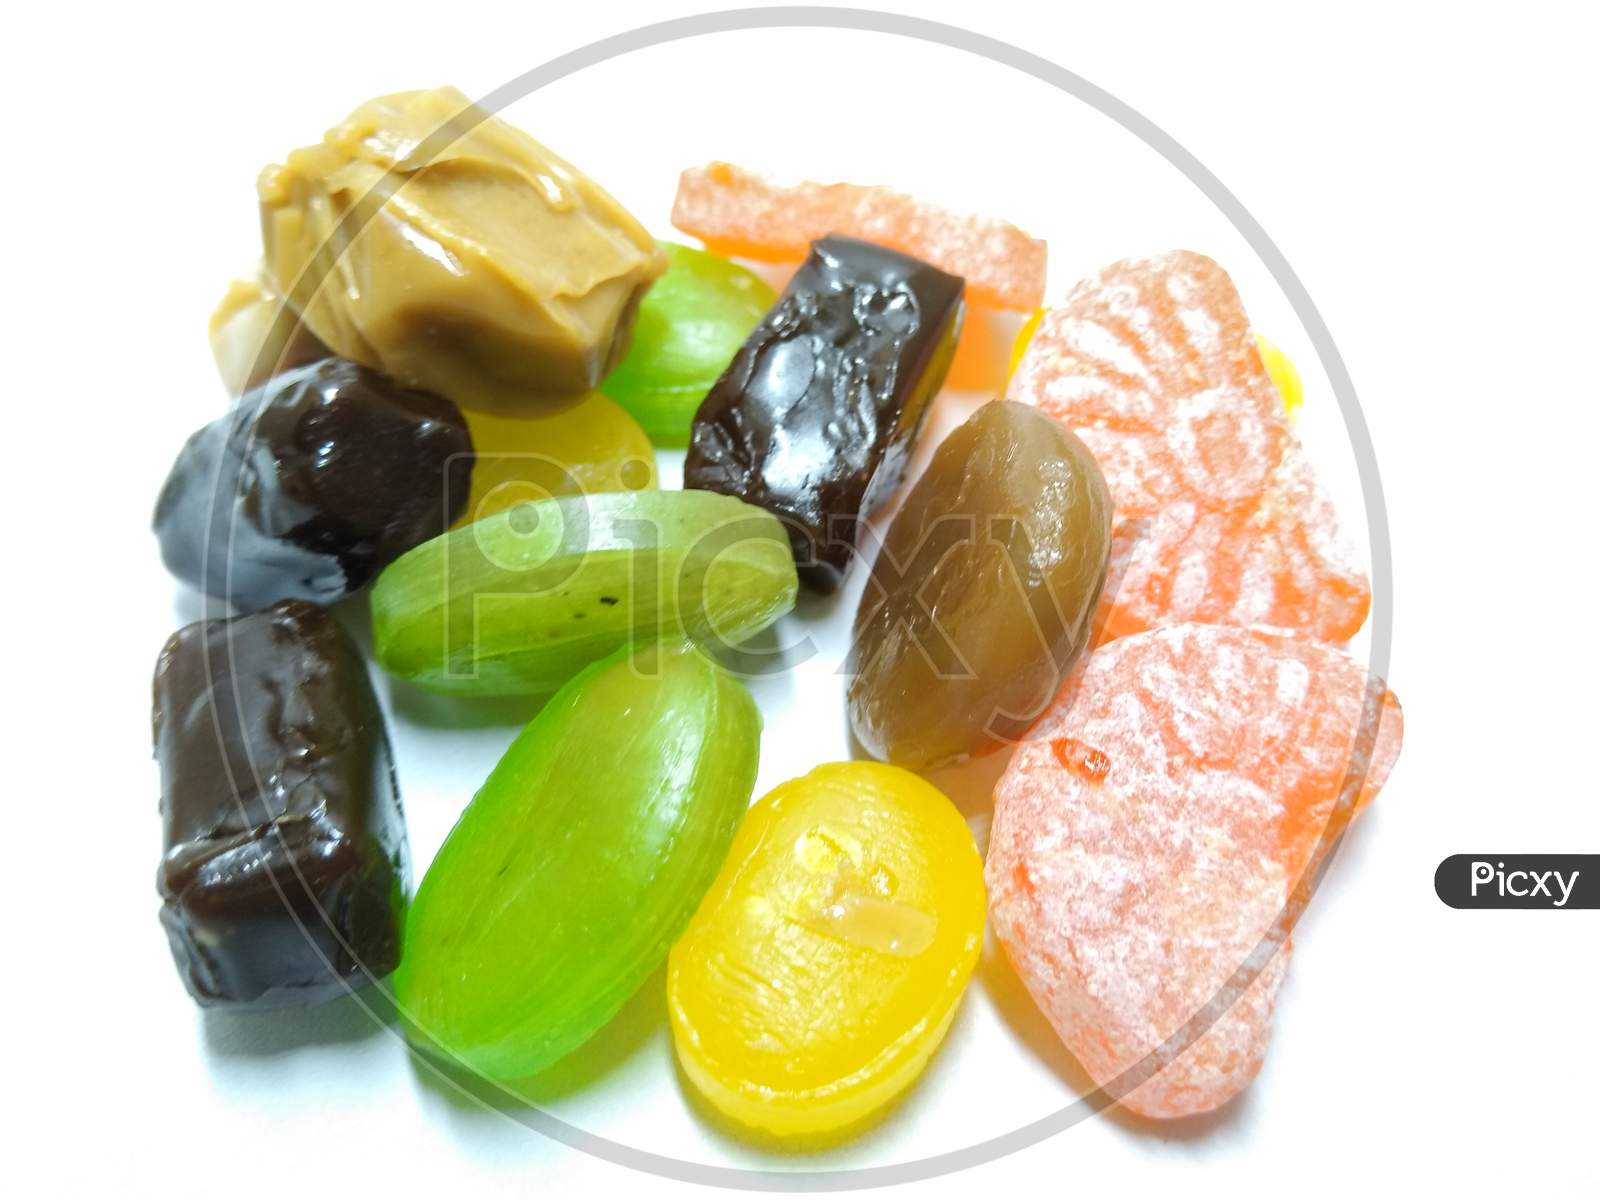 Candies And Toffees On White Background